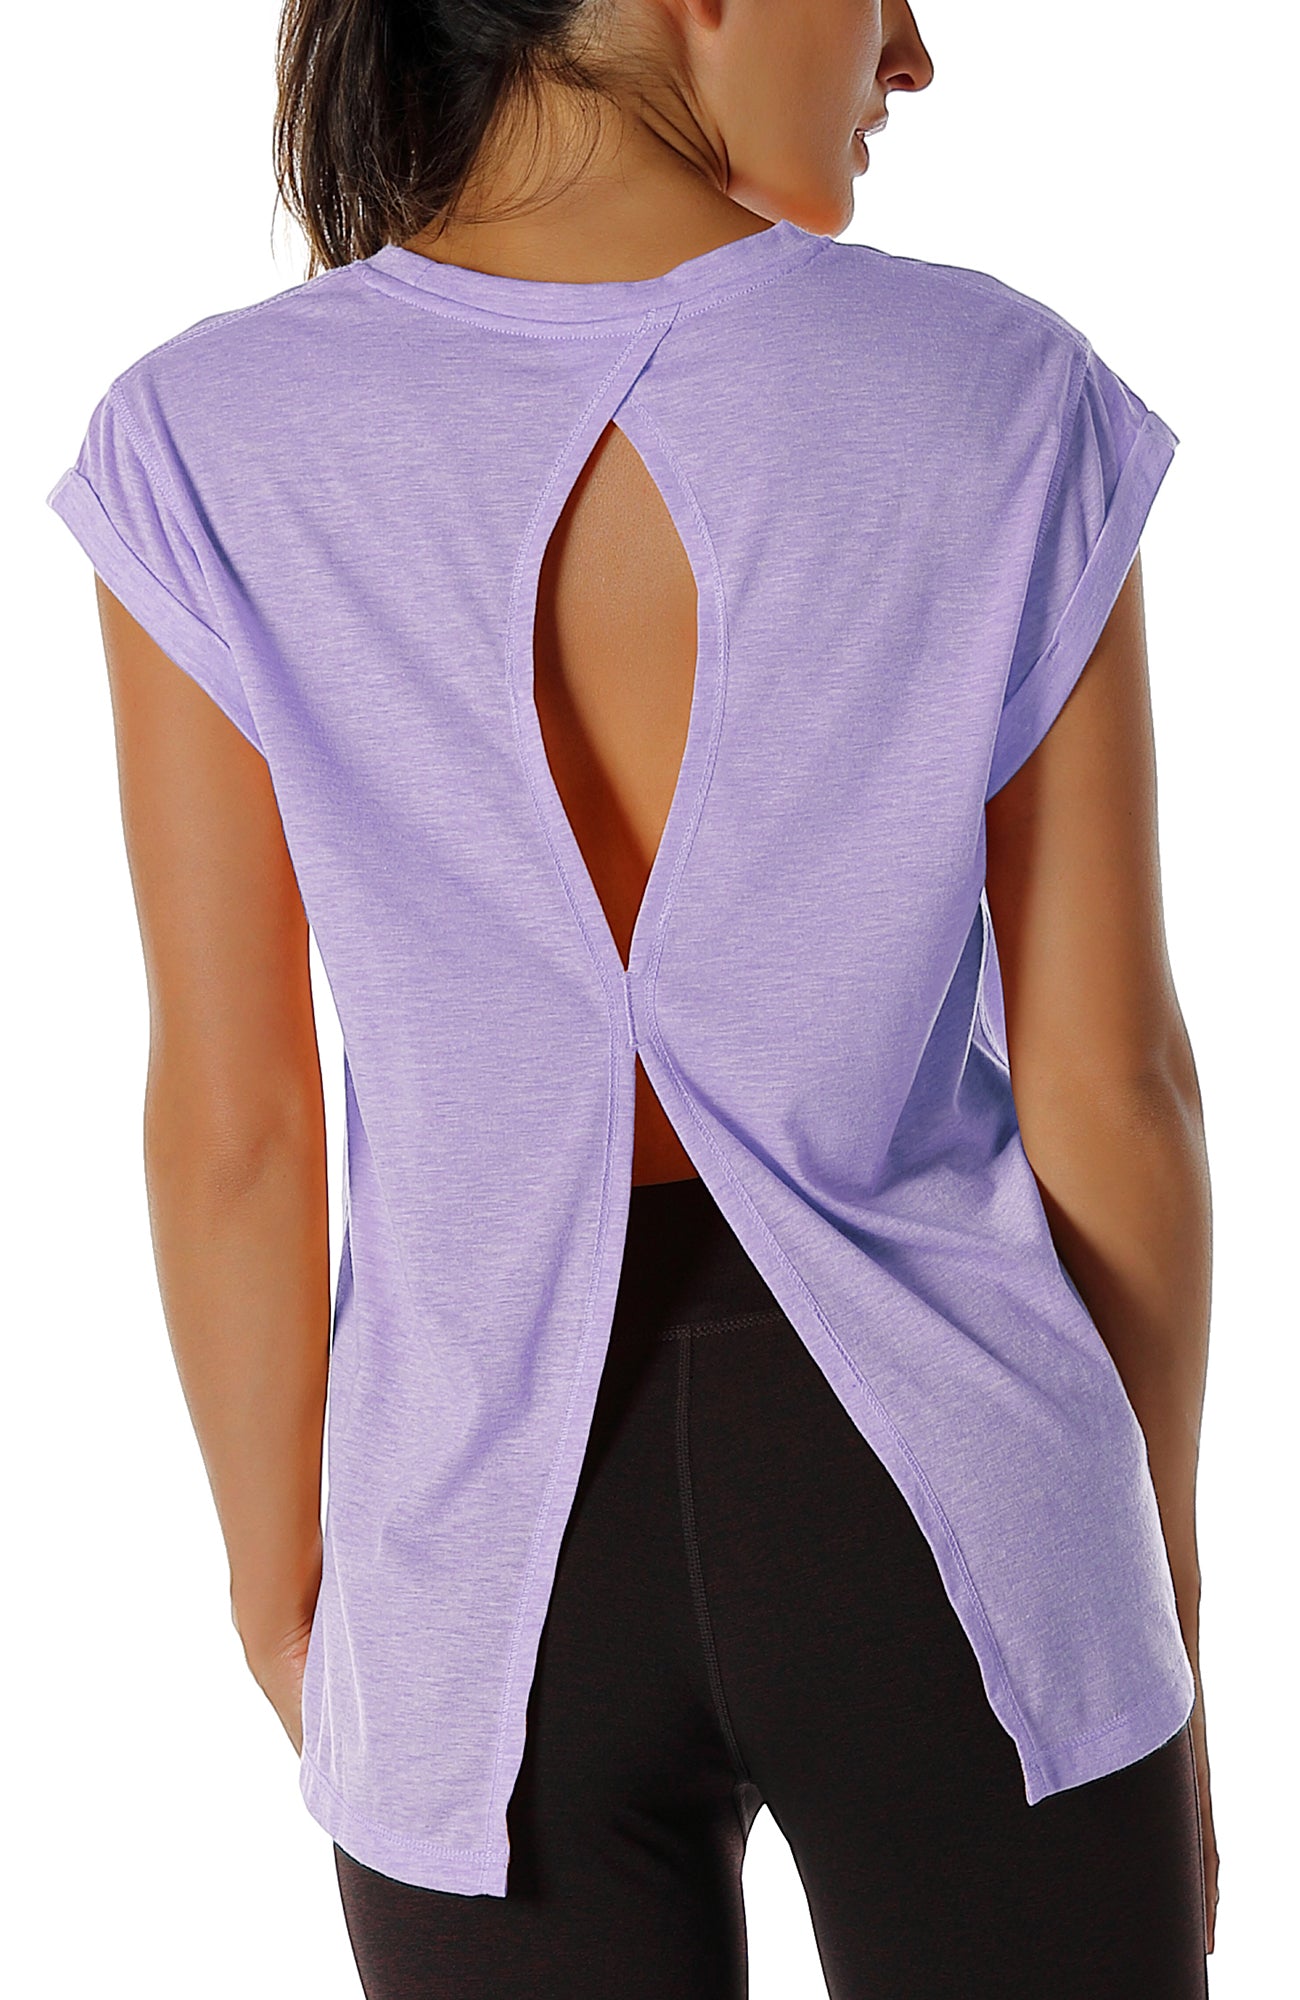 Women's Workout Shirts & Tops in Purple